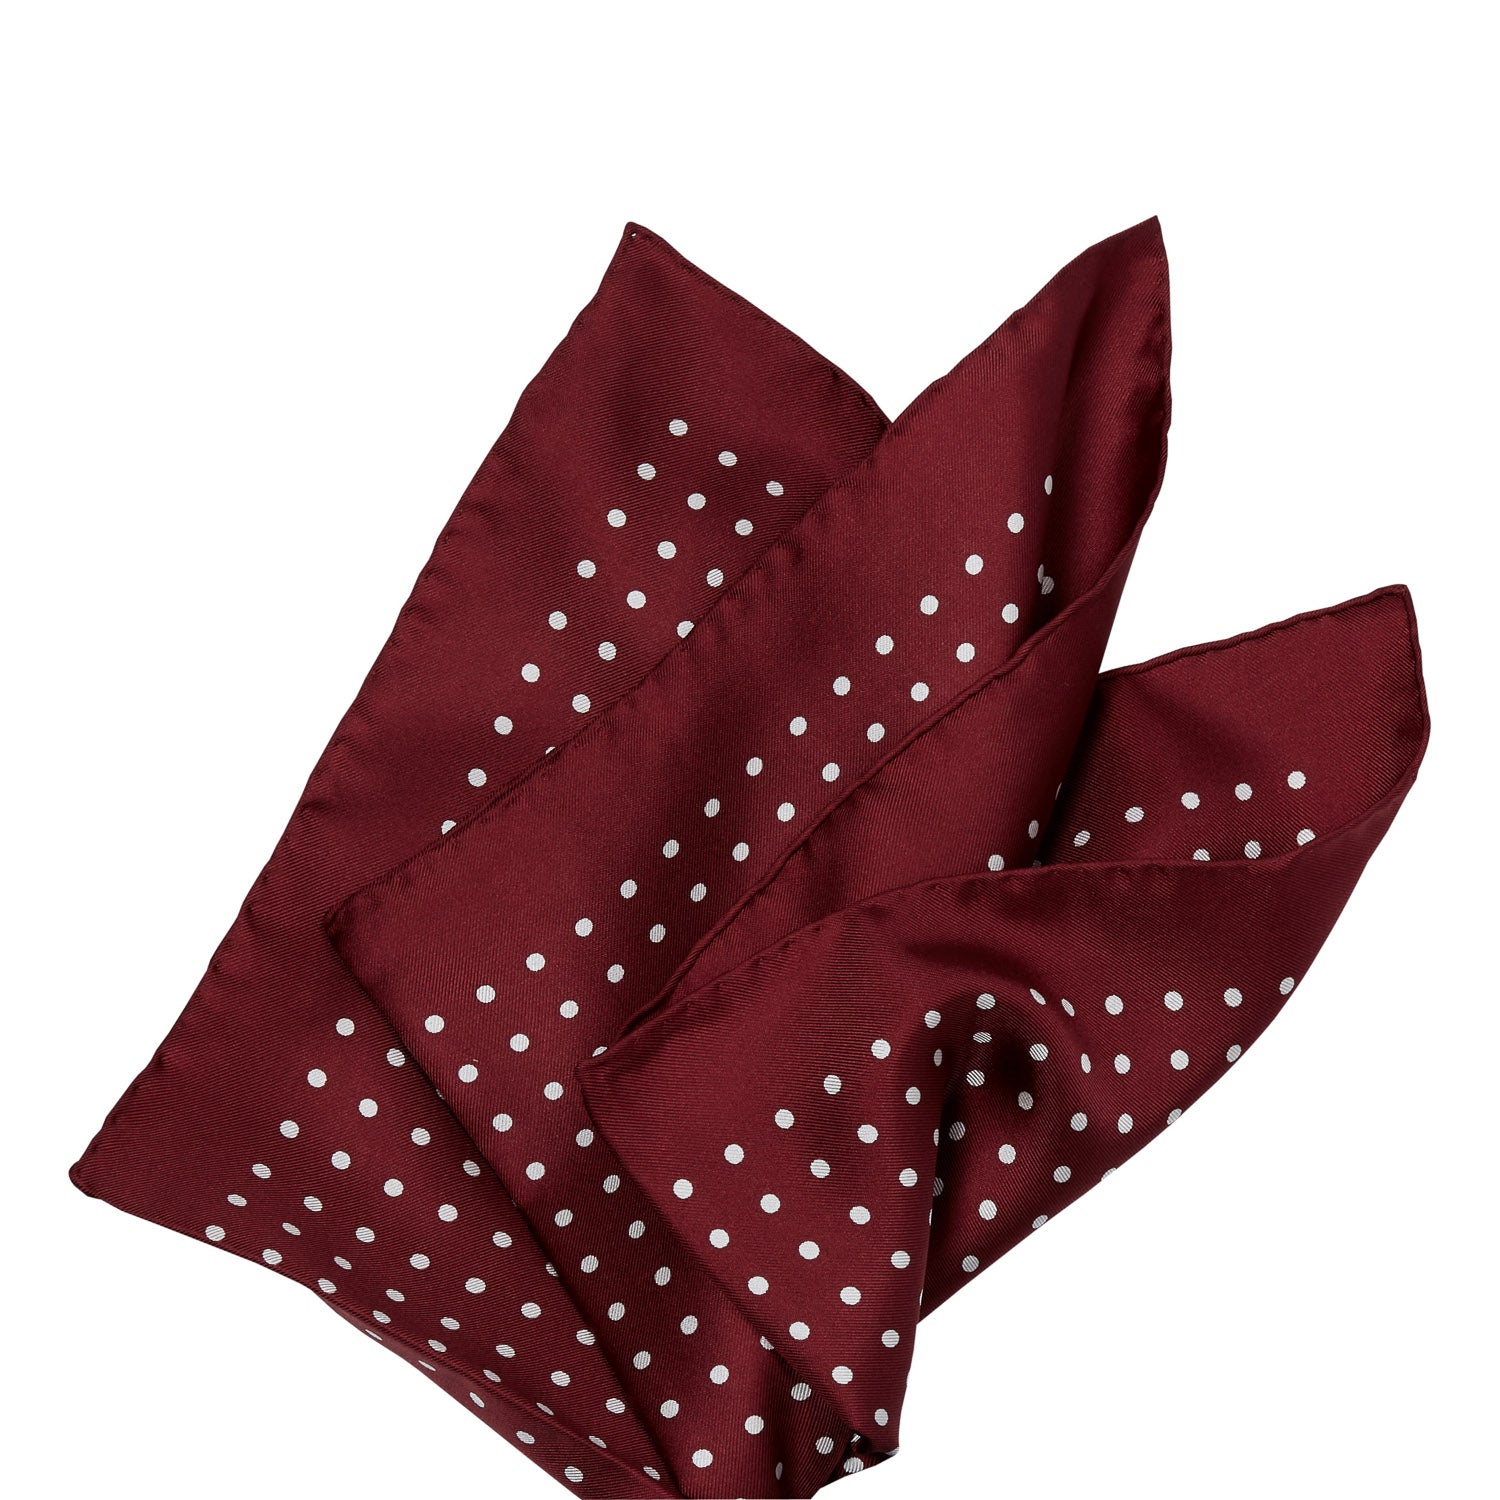 Sovereign Grade 100% Silk Burgundy London Dot Pocket Square from KirbyAllison.com to complete a formal outfit.